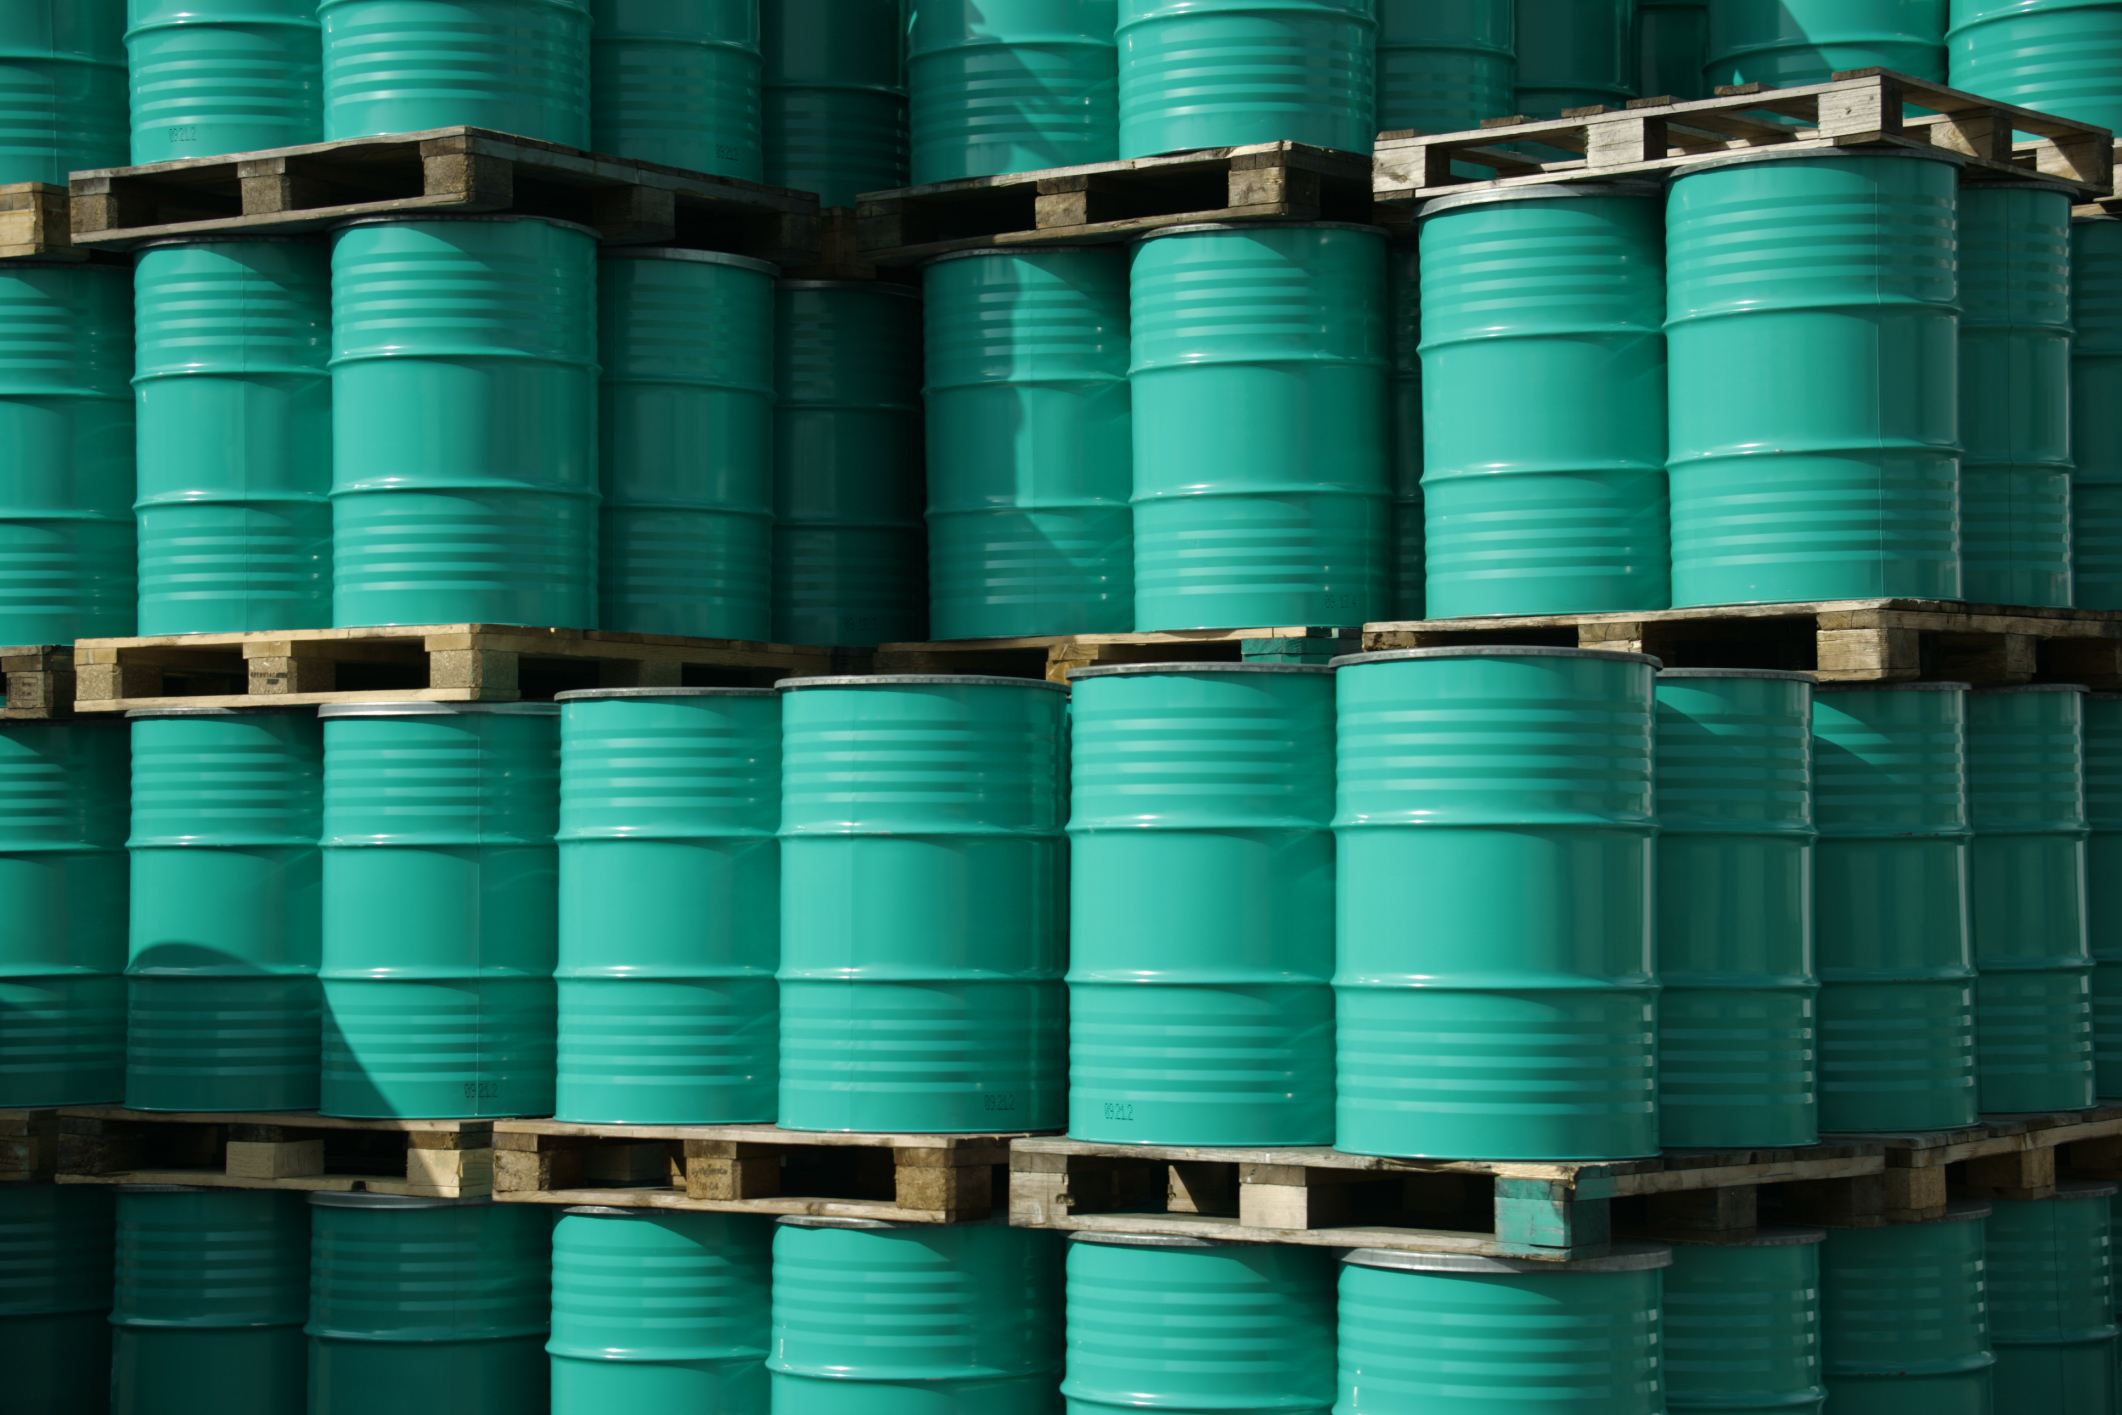 The price of a barrel of oil is predicted to remain below $100 for the next few years.